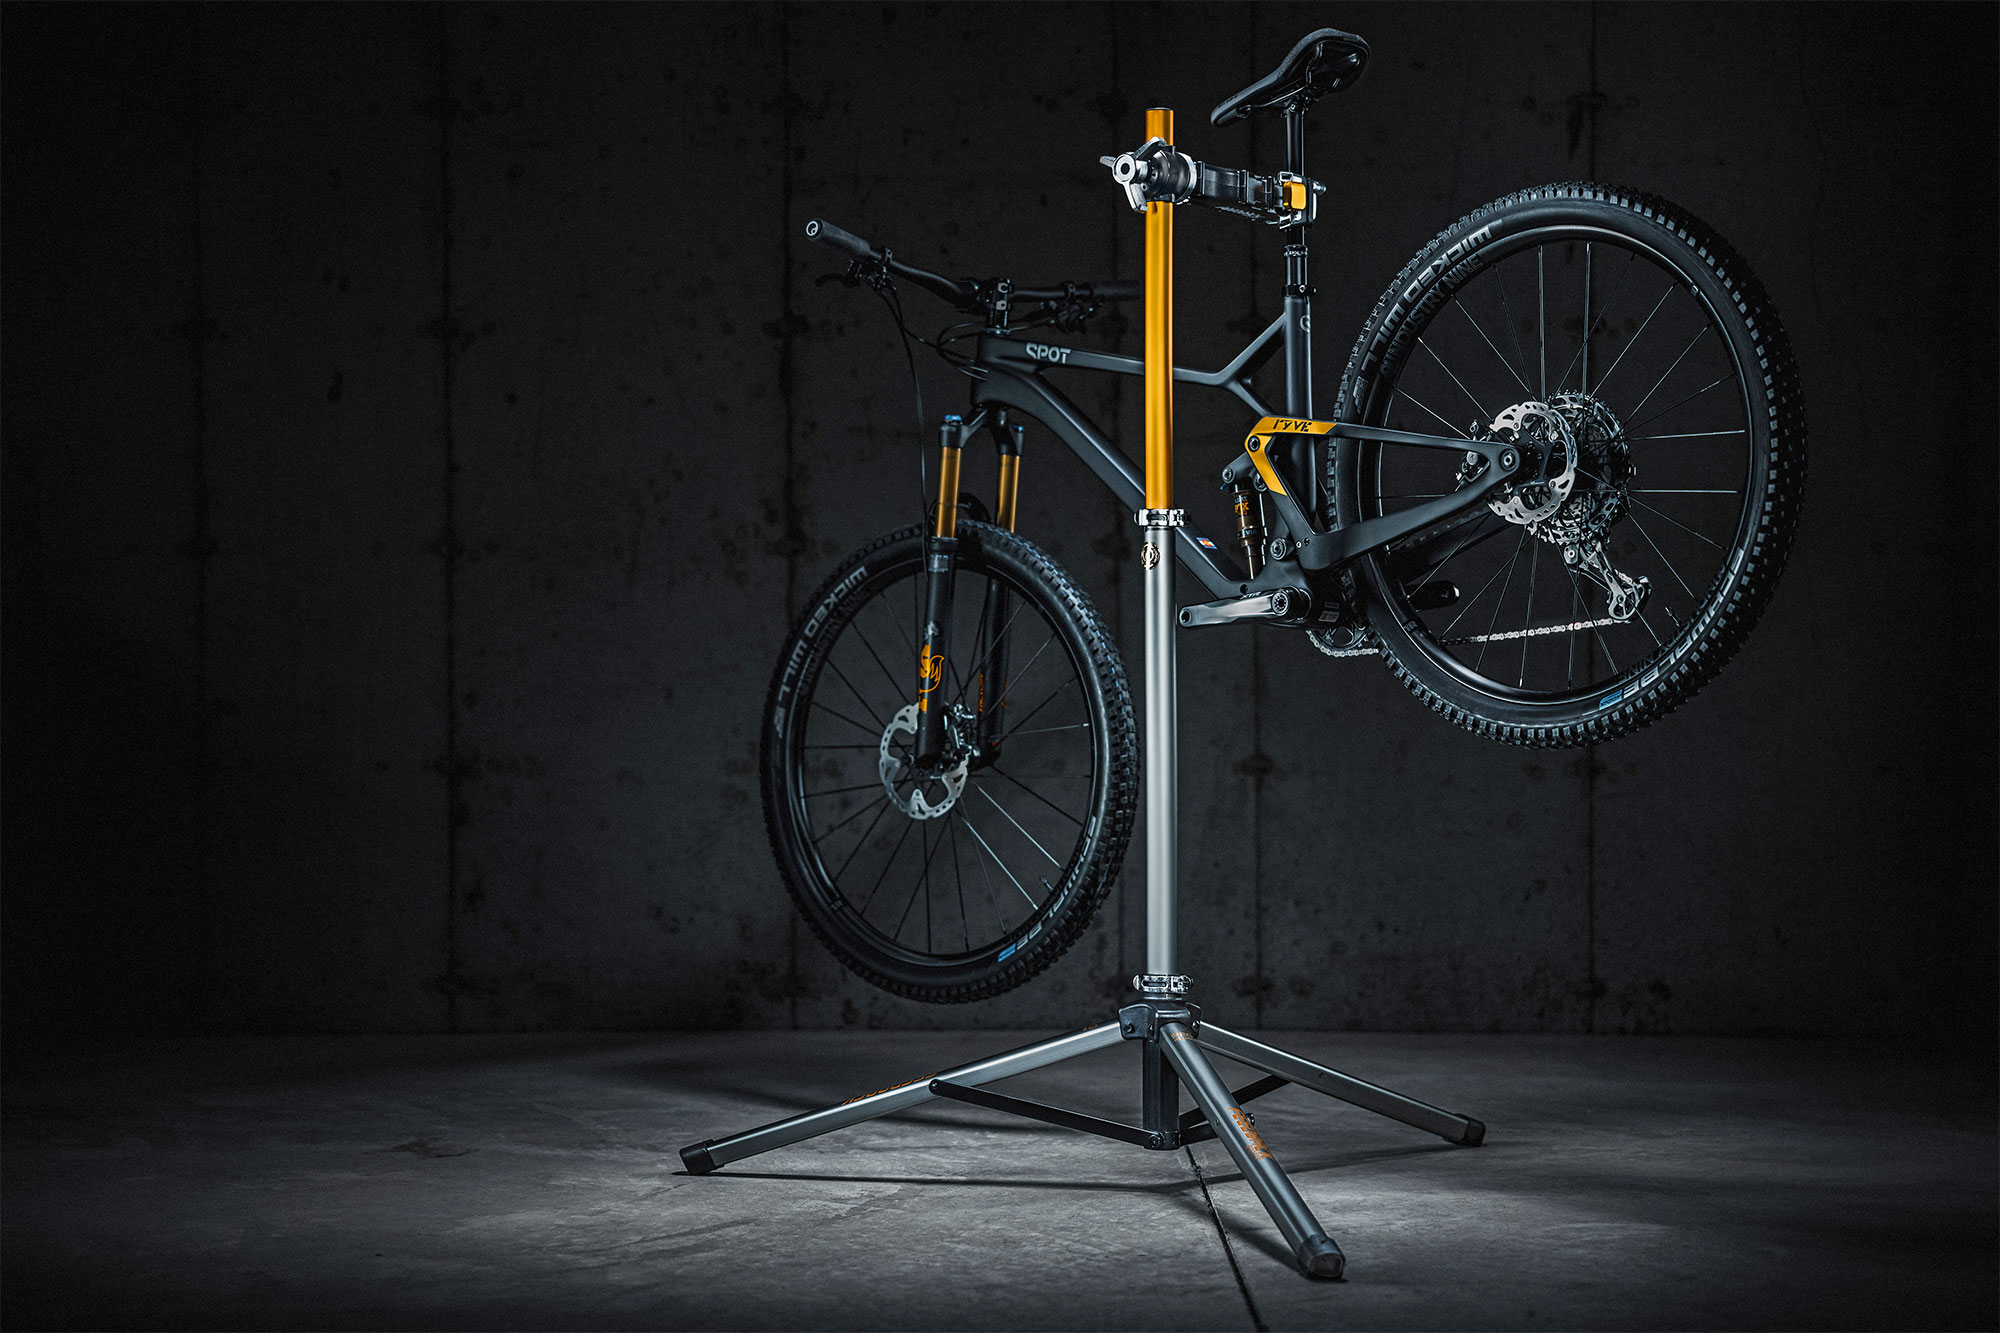 Feedback 20th Anniversary Limited Edition Pro Mechanic repair stand in gold & platinum, with a bike